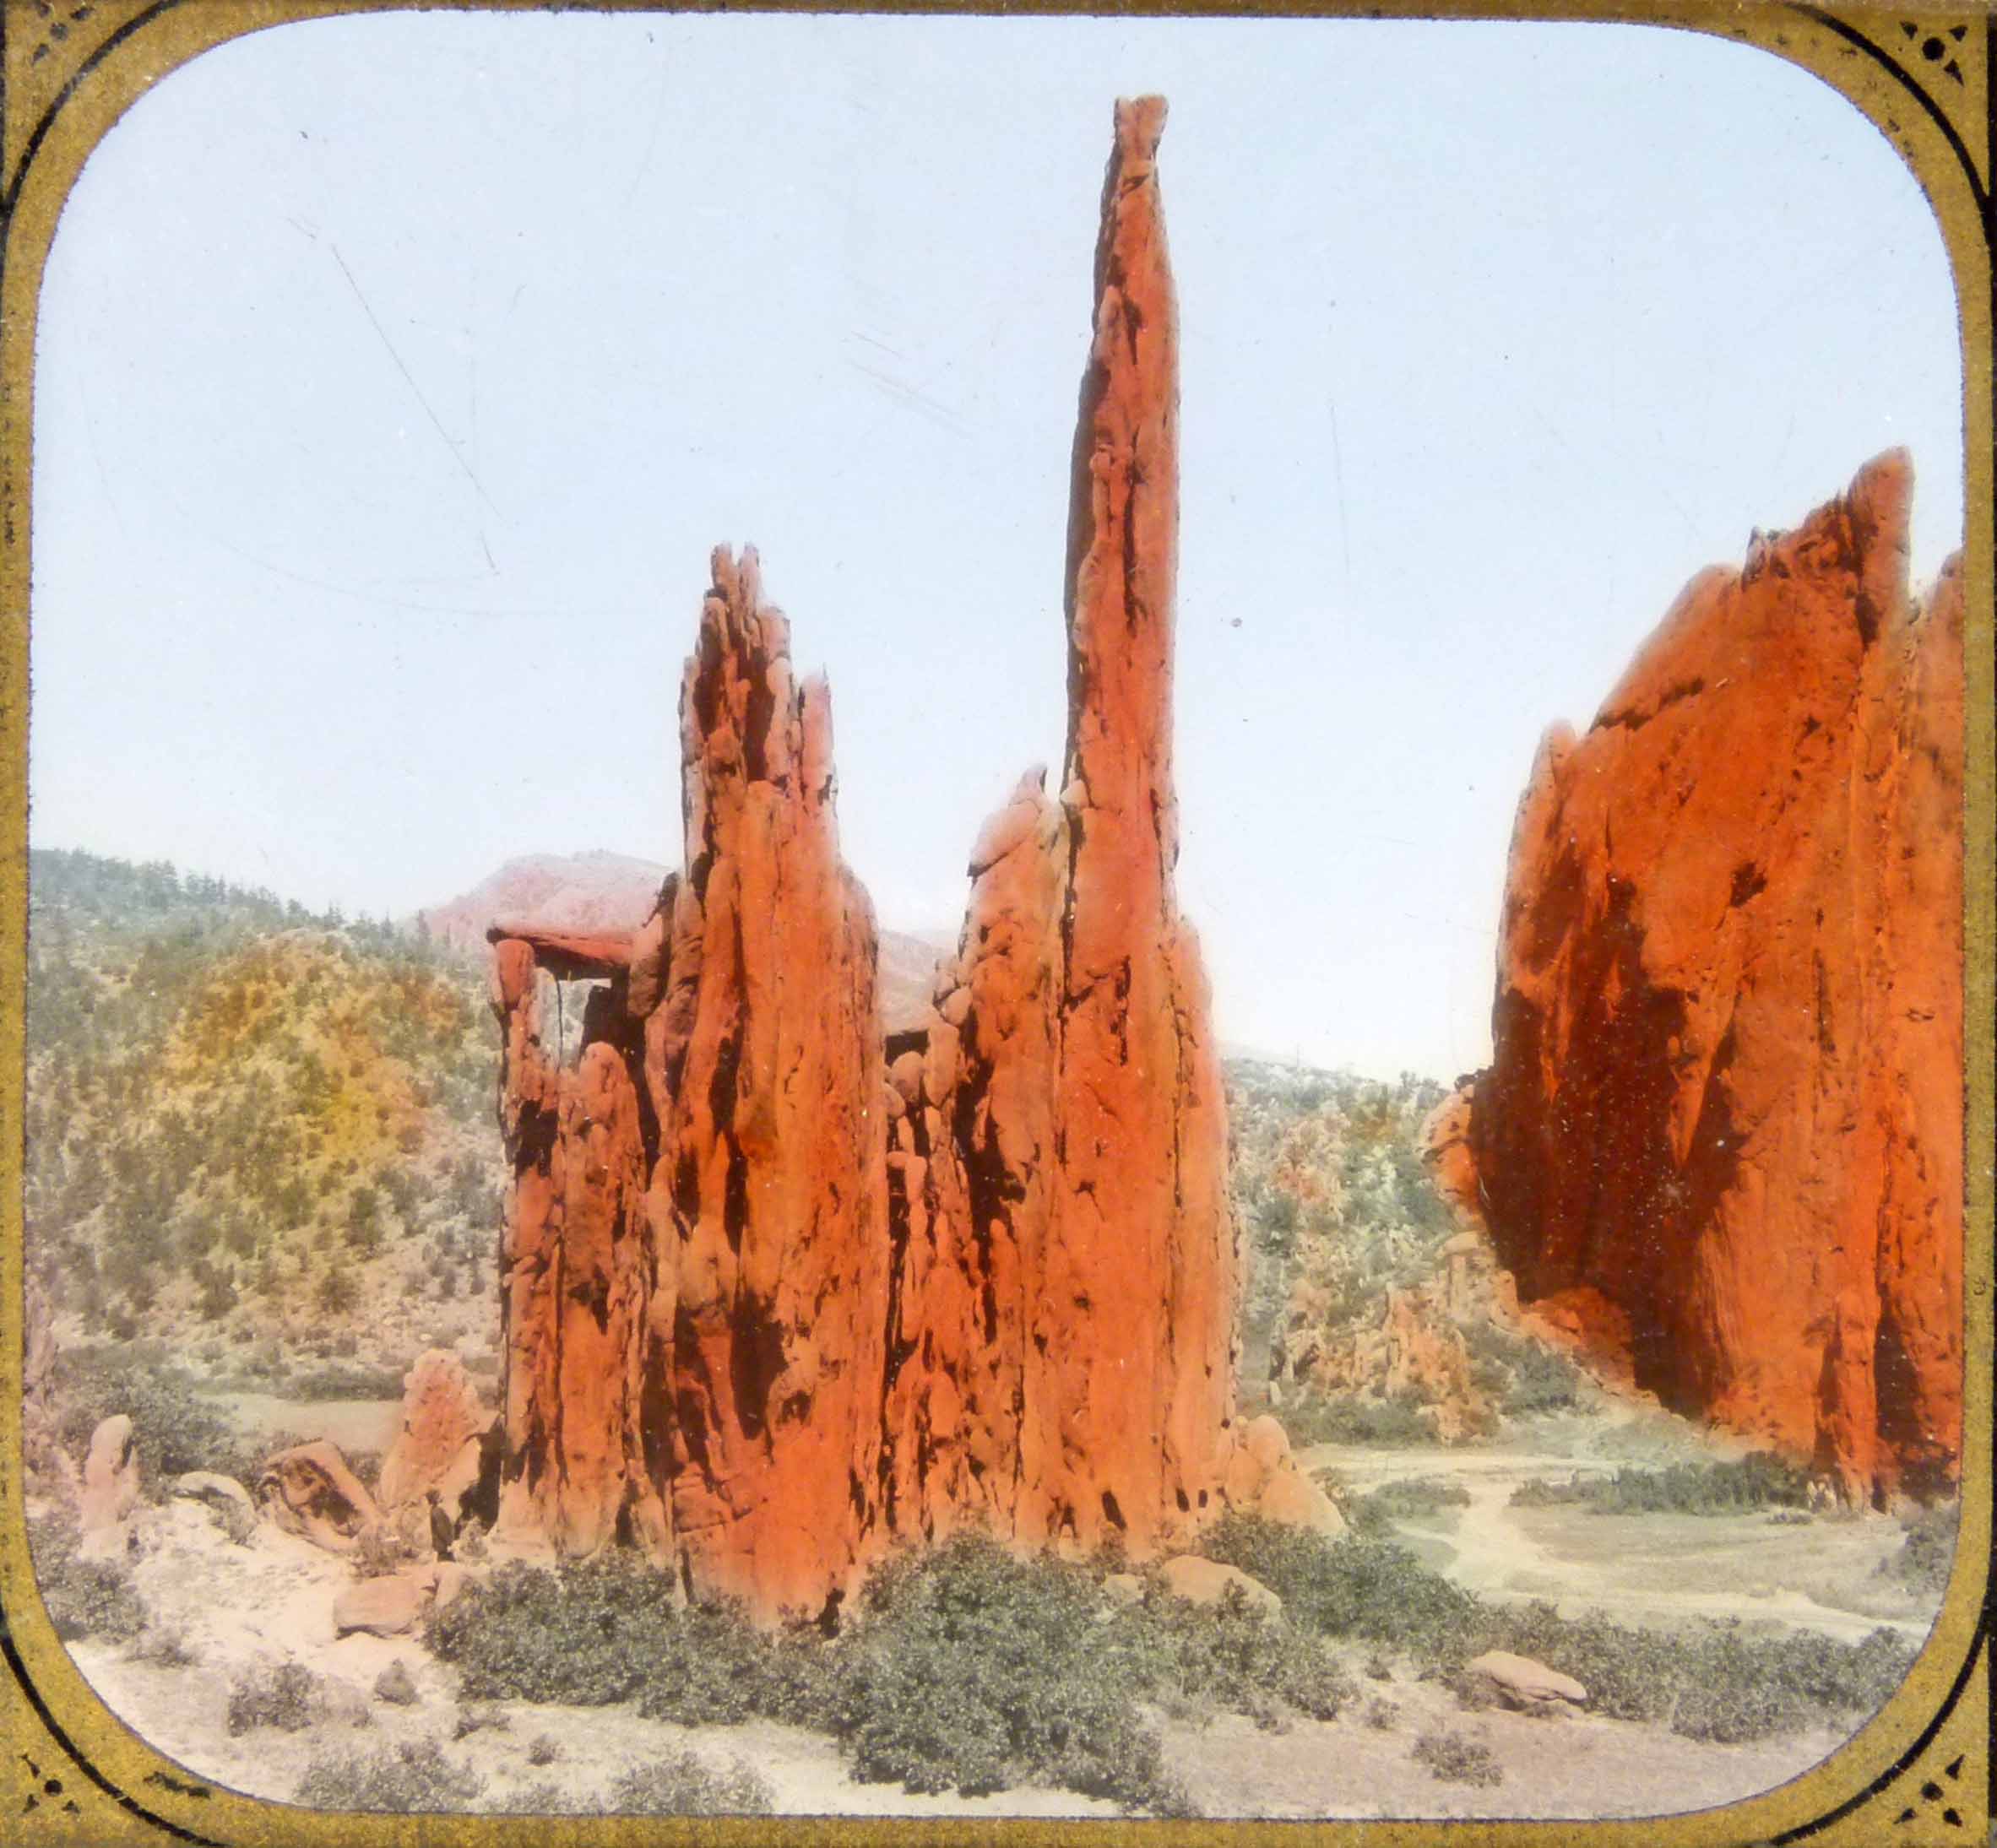 Thirty-nine glass magic lantern slides of views of west and central United States, produced by